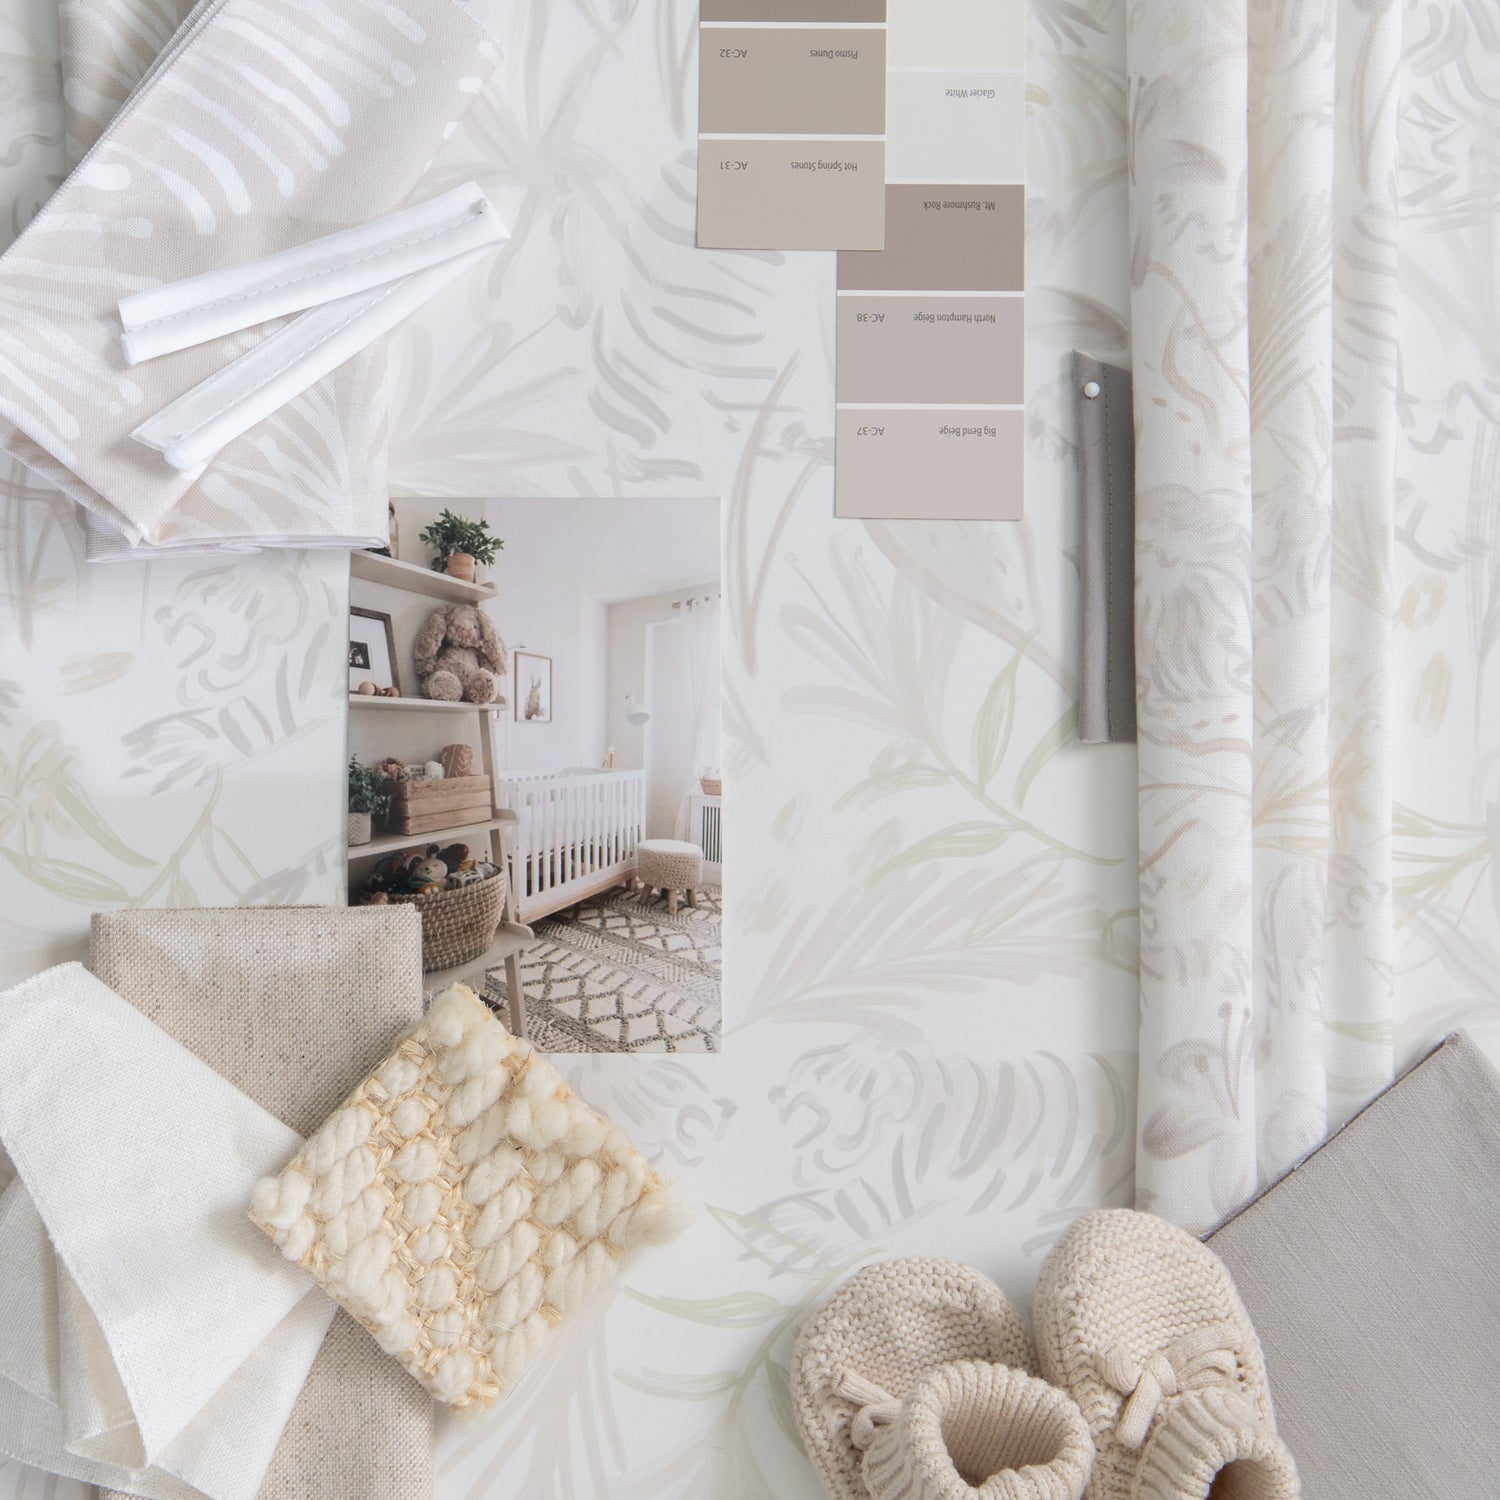 Interior design moodboard and fabric inspirations with Beige Botanical Stripe Printed Swatch, Oat Linen Swatch, and Beige Chinoiserie Tiger Printed Swatch